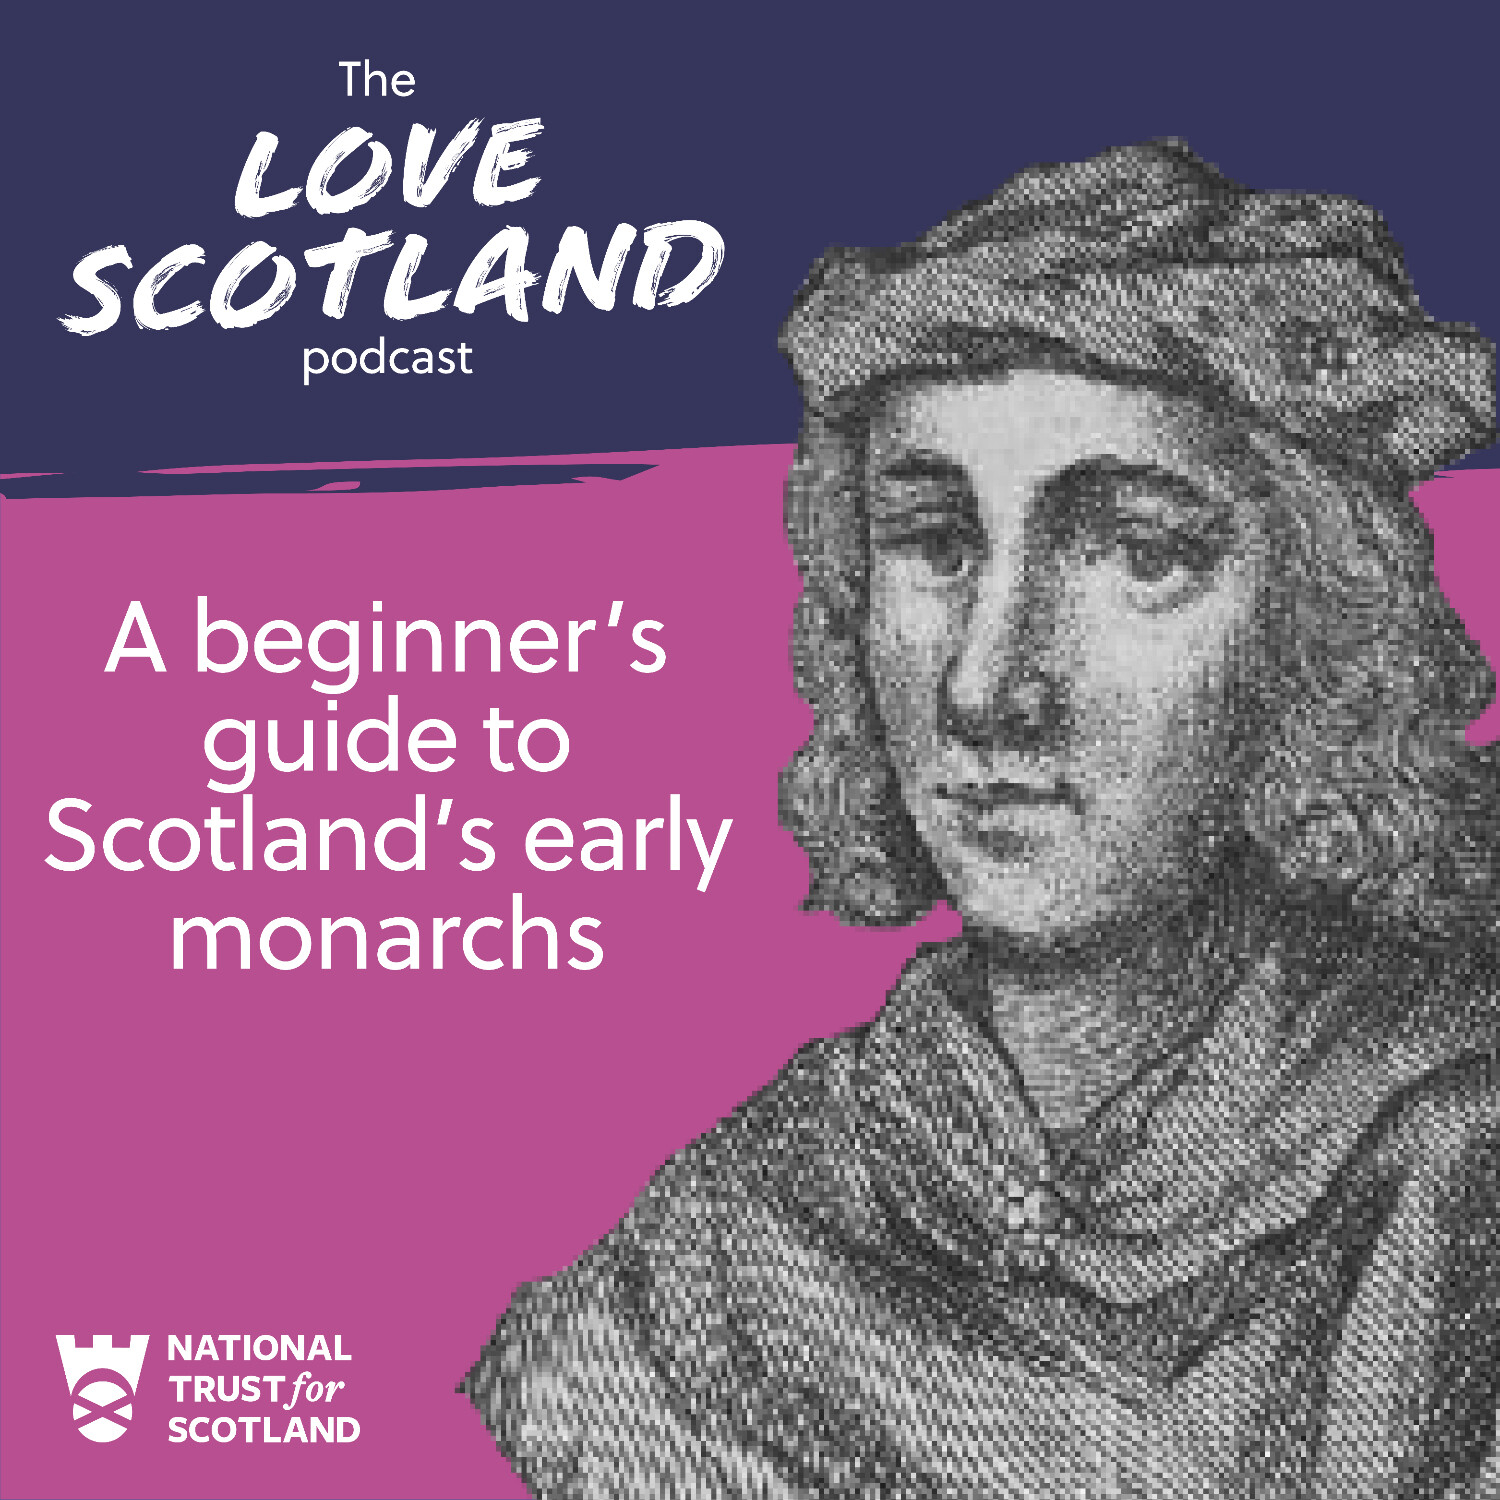 A beginner's guide to Scotland's early monarchs